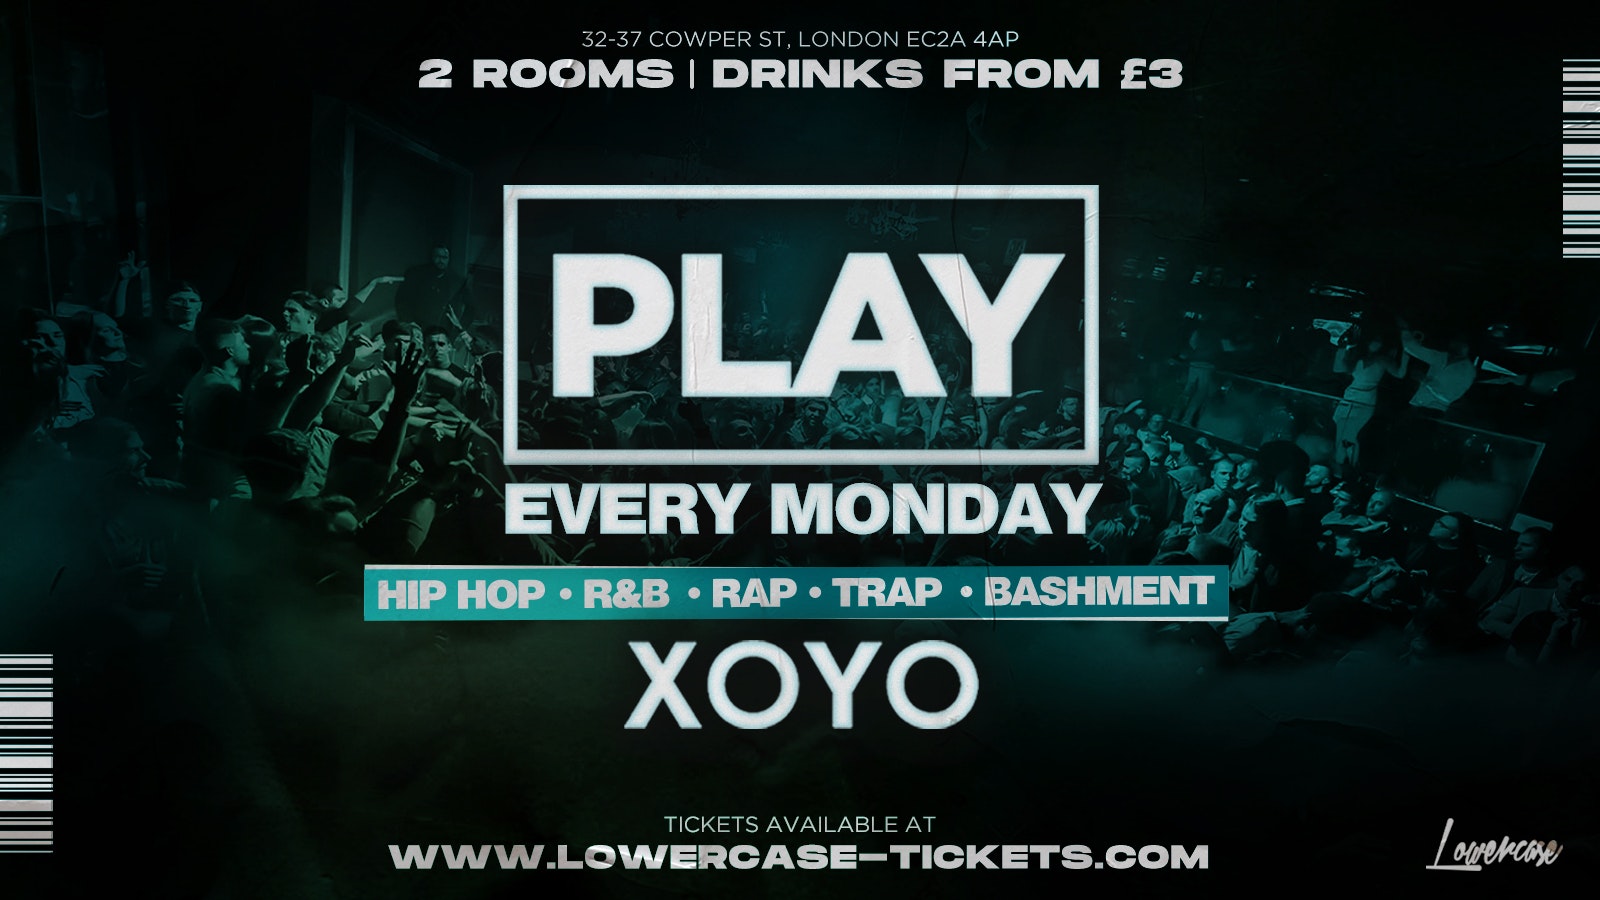 Play London At XOYO – The Biggest Weekly Monday Student Night